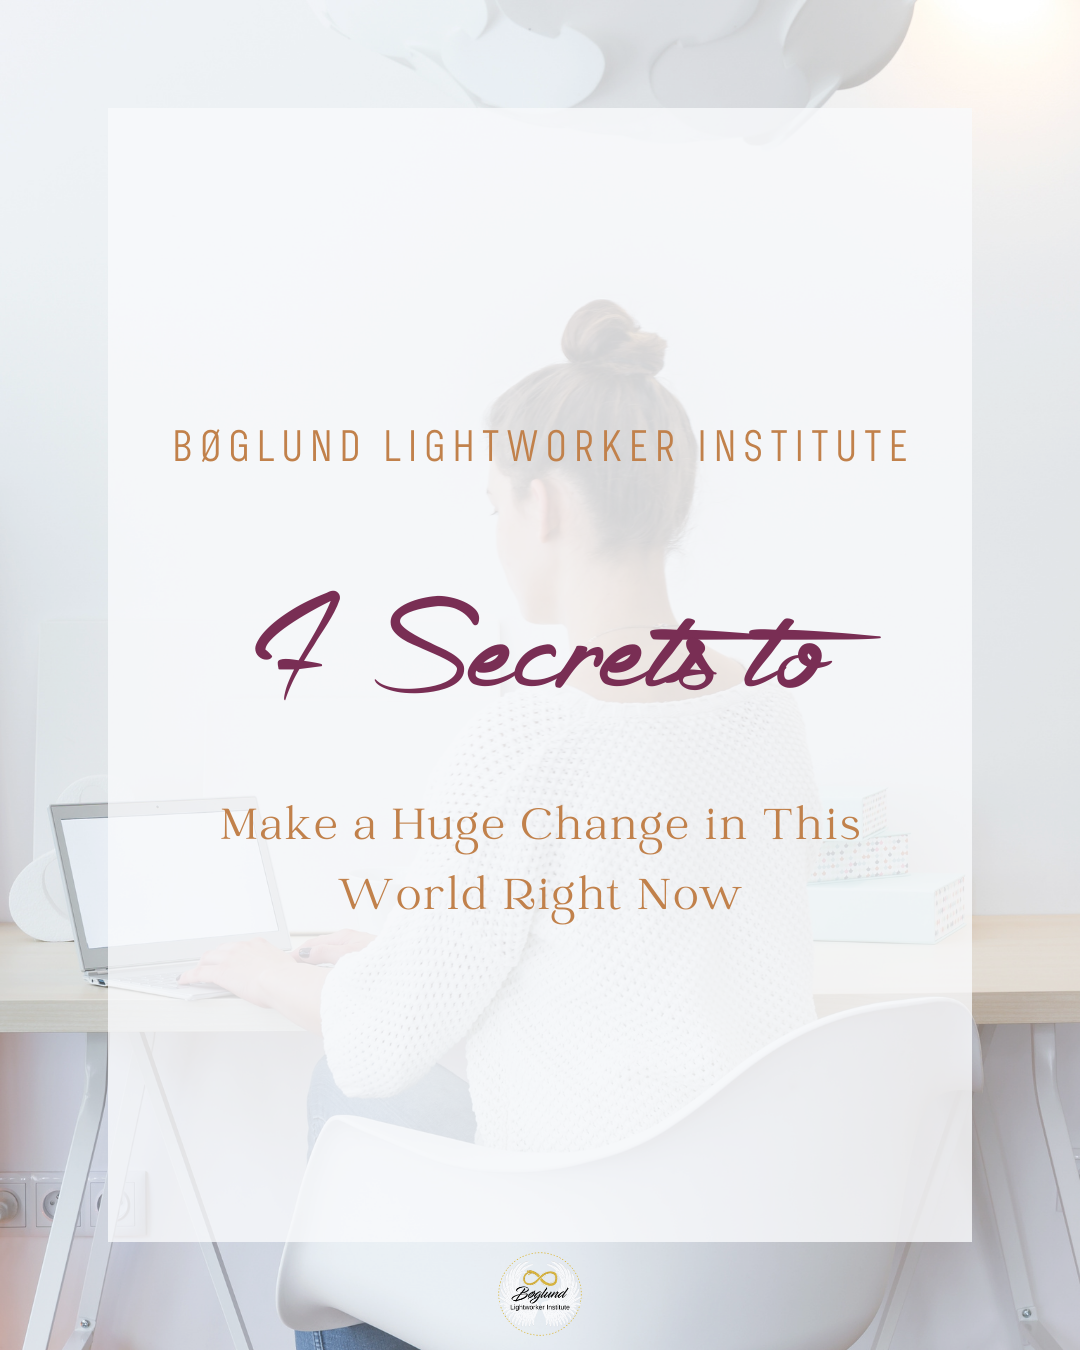 7 Secrets to Make a Huge Change in This World Right Now